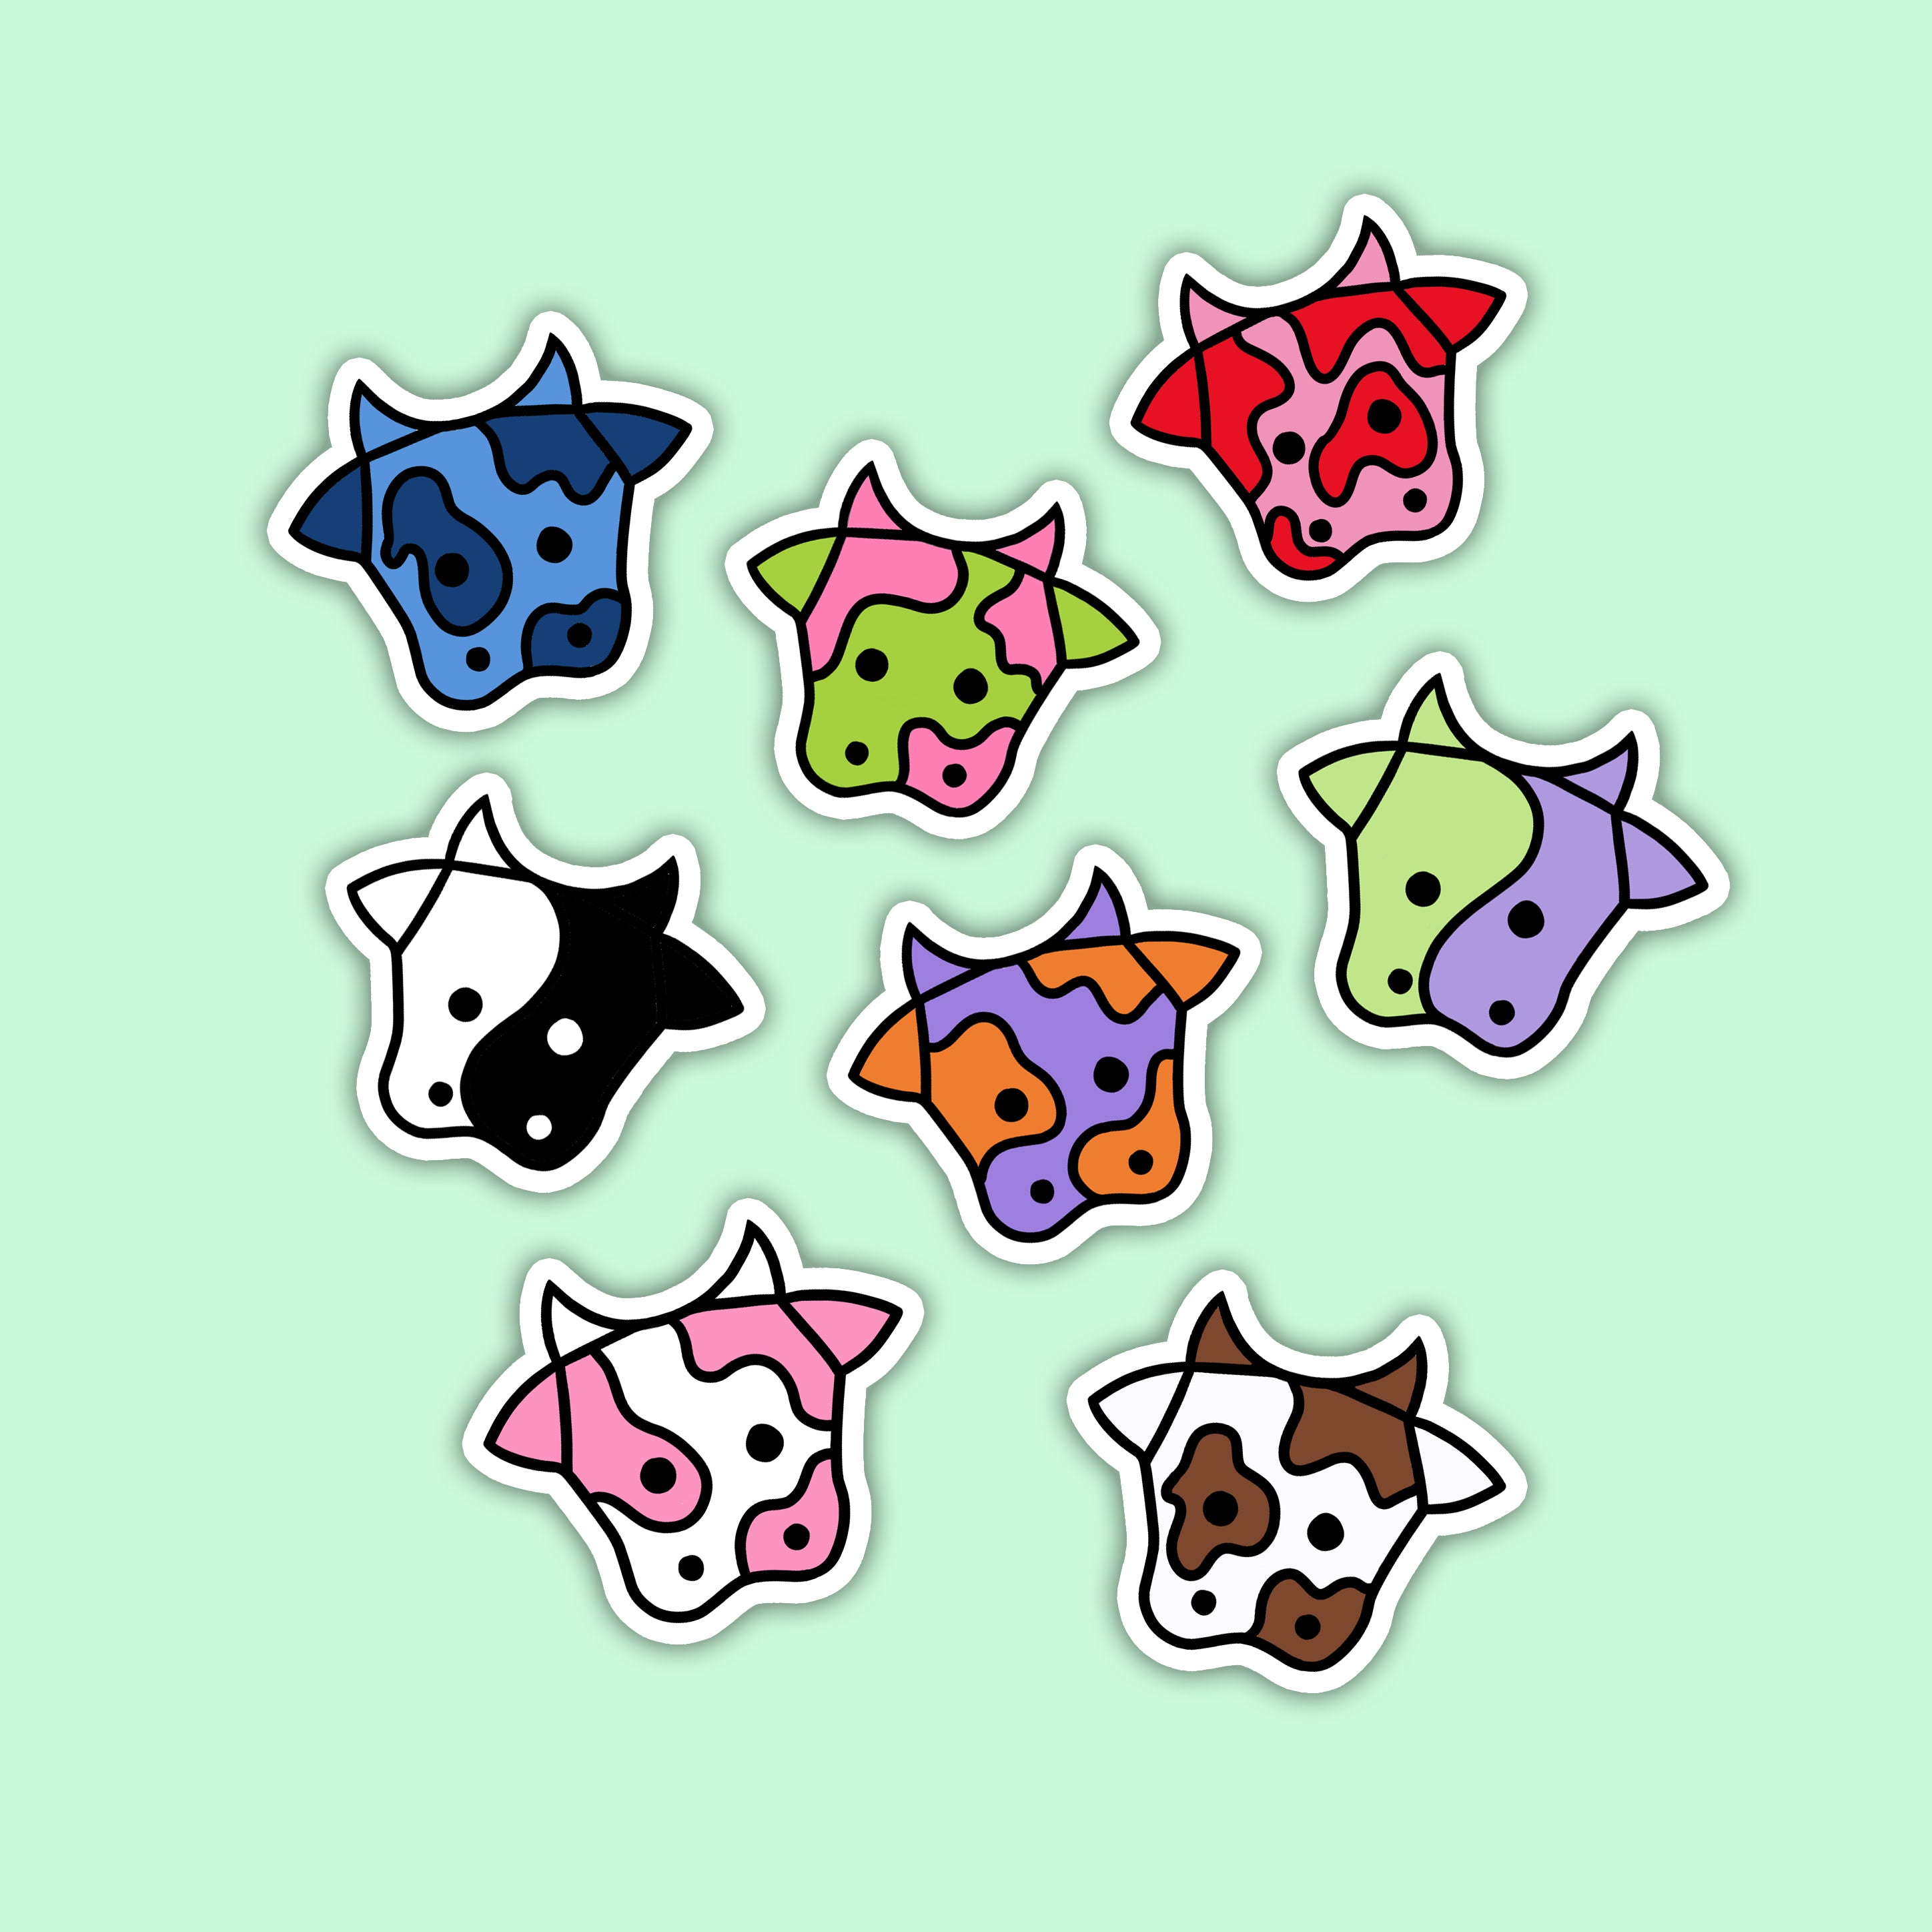 Cosmic Cows Sticker Pack